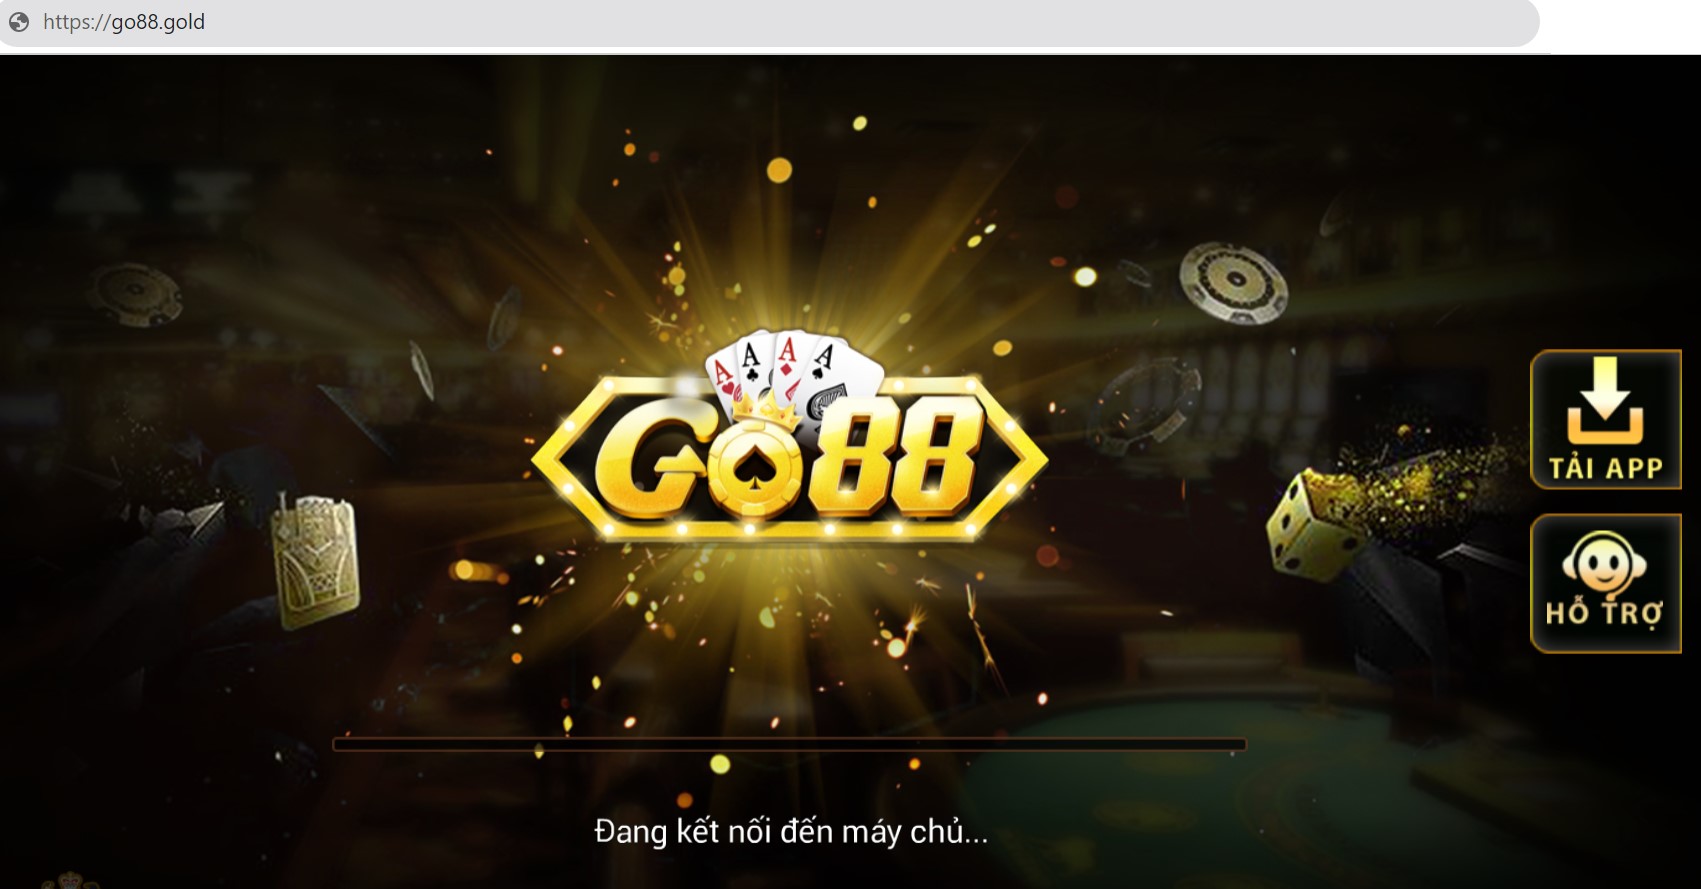 Domain go88.gold của cổng game Go88